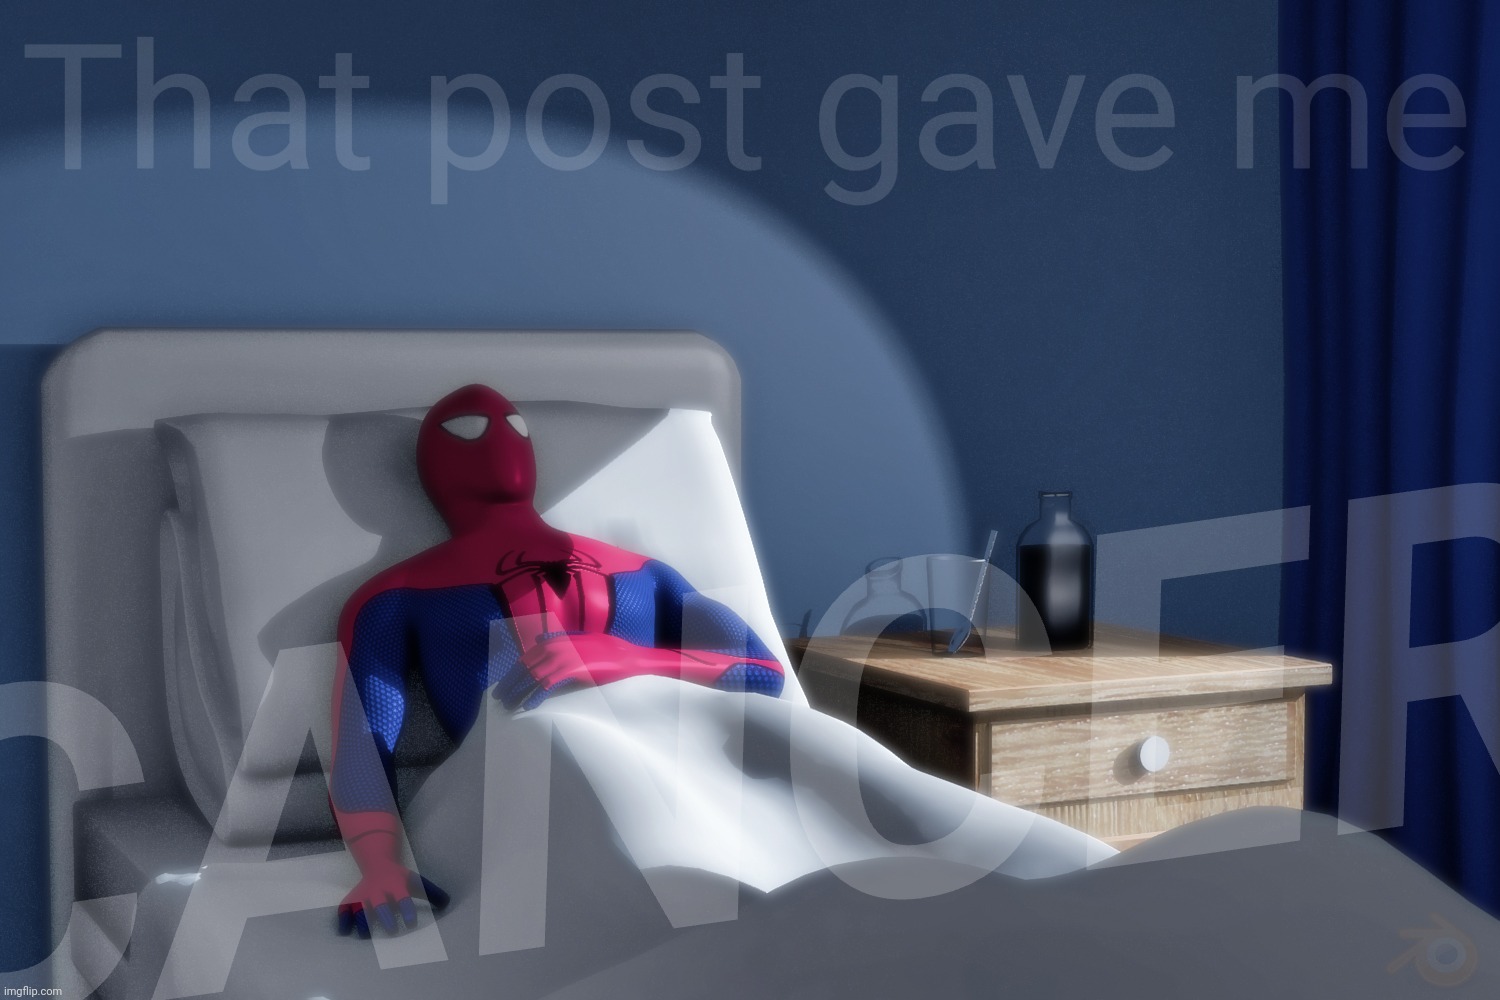 Spiderman Hospital | That post gave me CANCER | image tagged in spiderman hospital | made w/ Imgflip meme maker